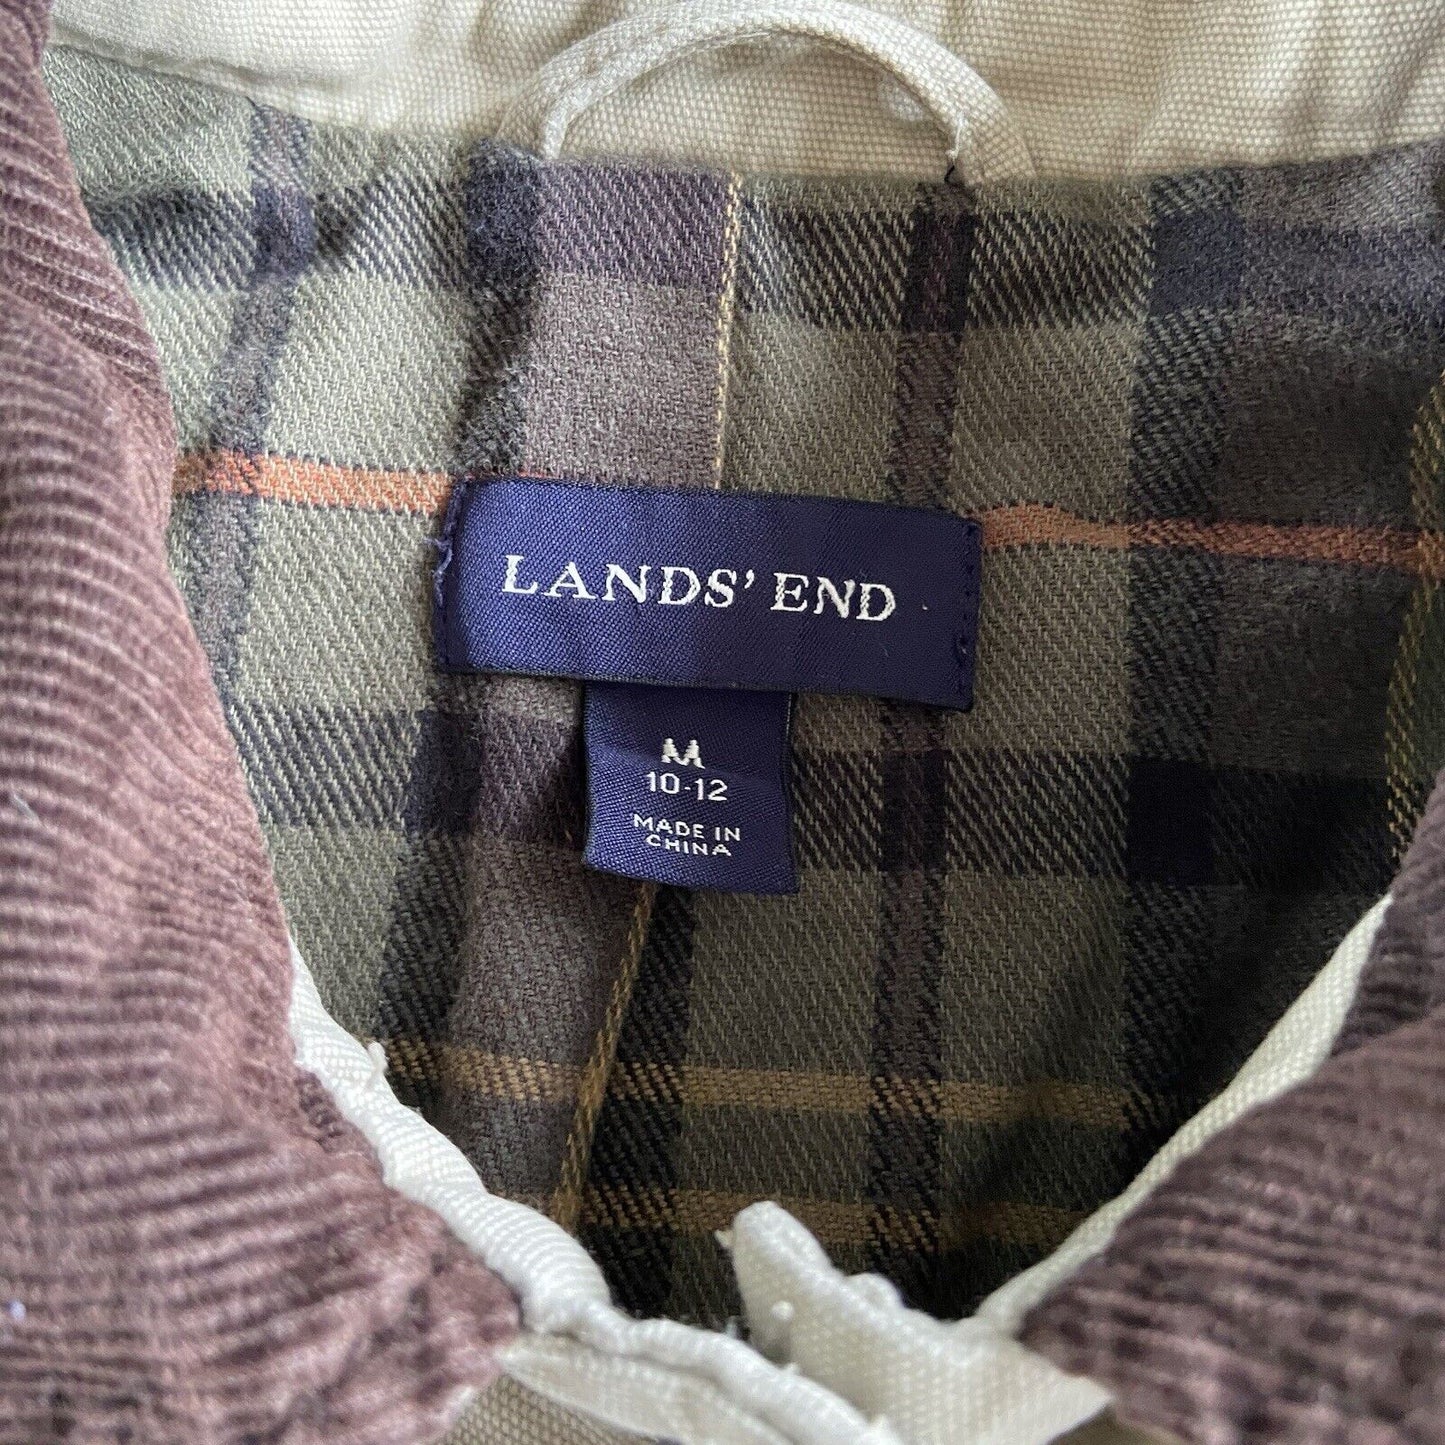 Vintage Lands End Field Jacket 90s Size M Cream Chore Hunting Workwear